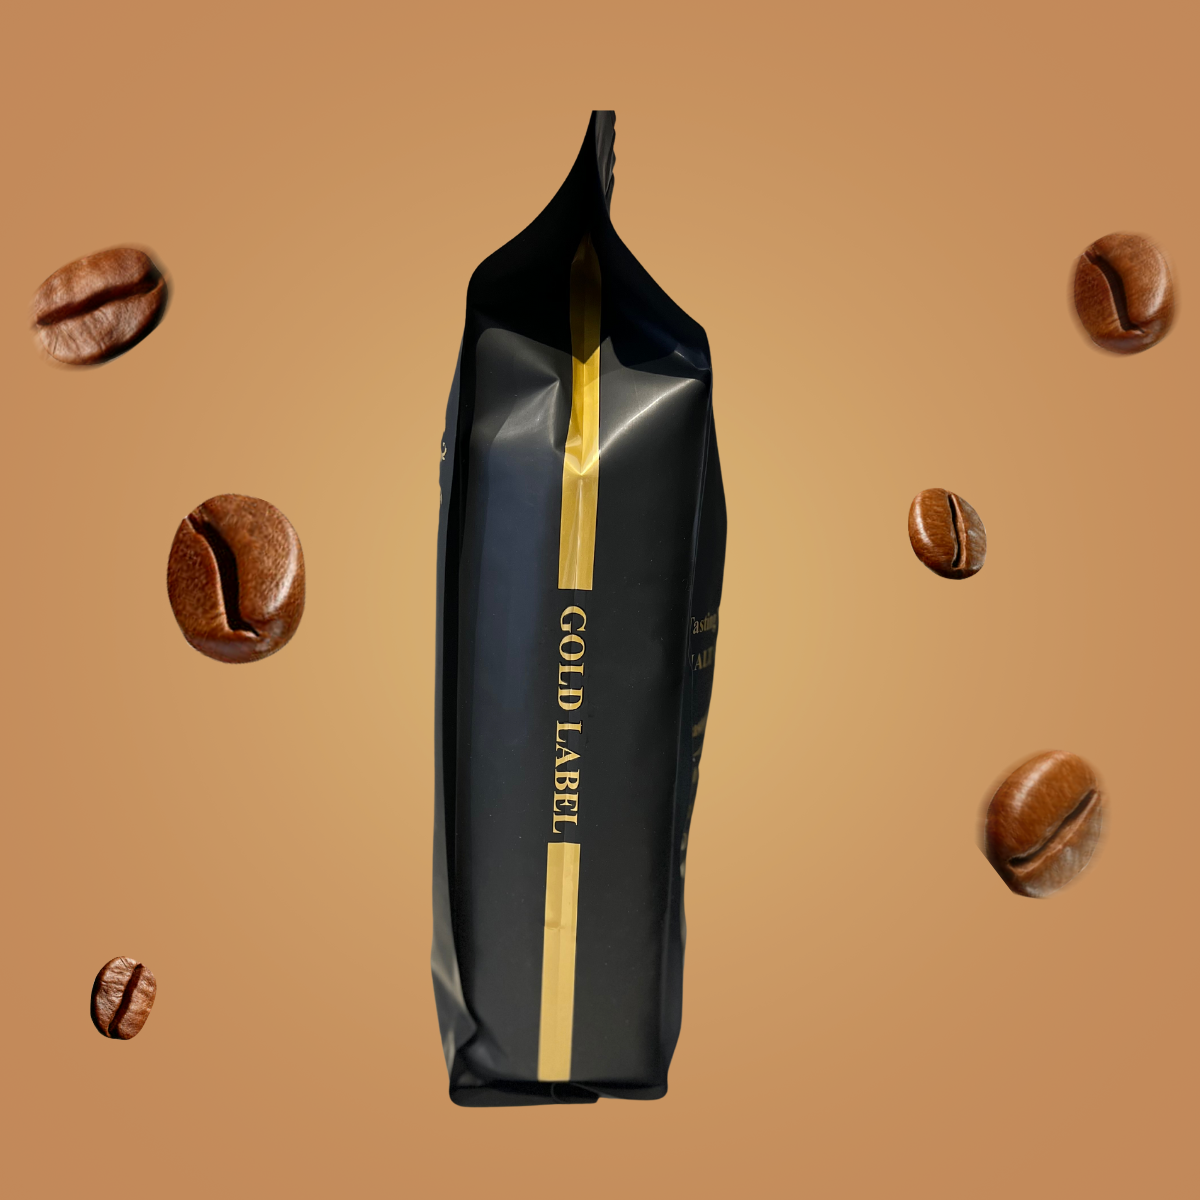 1kg Gold Label coffee